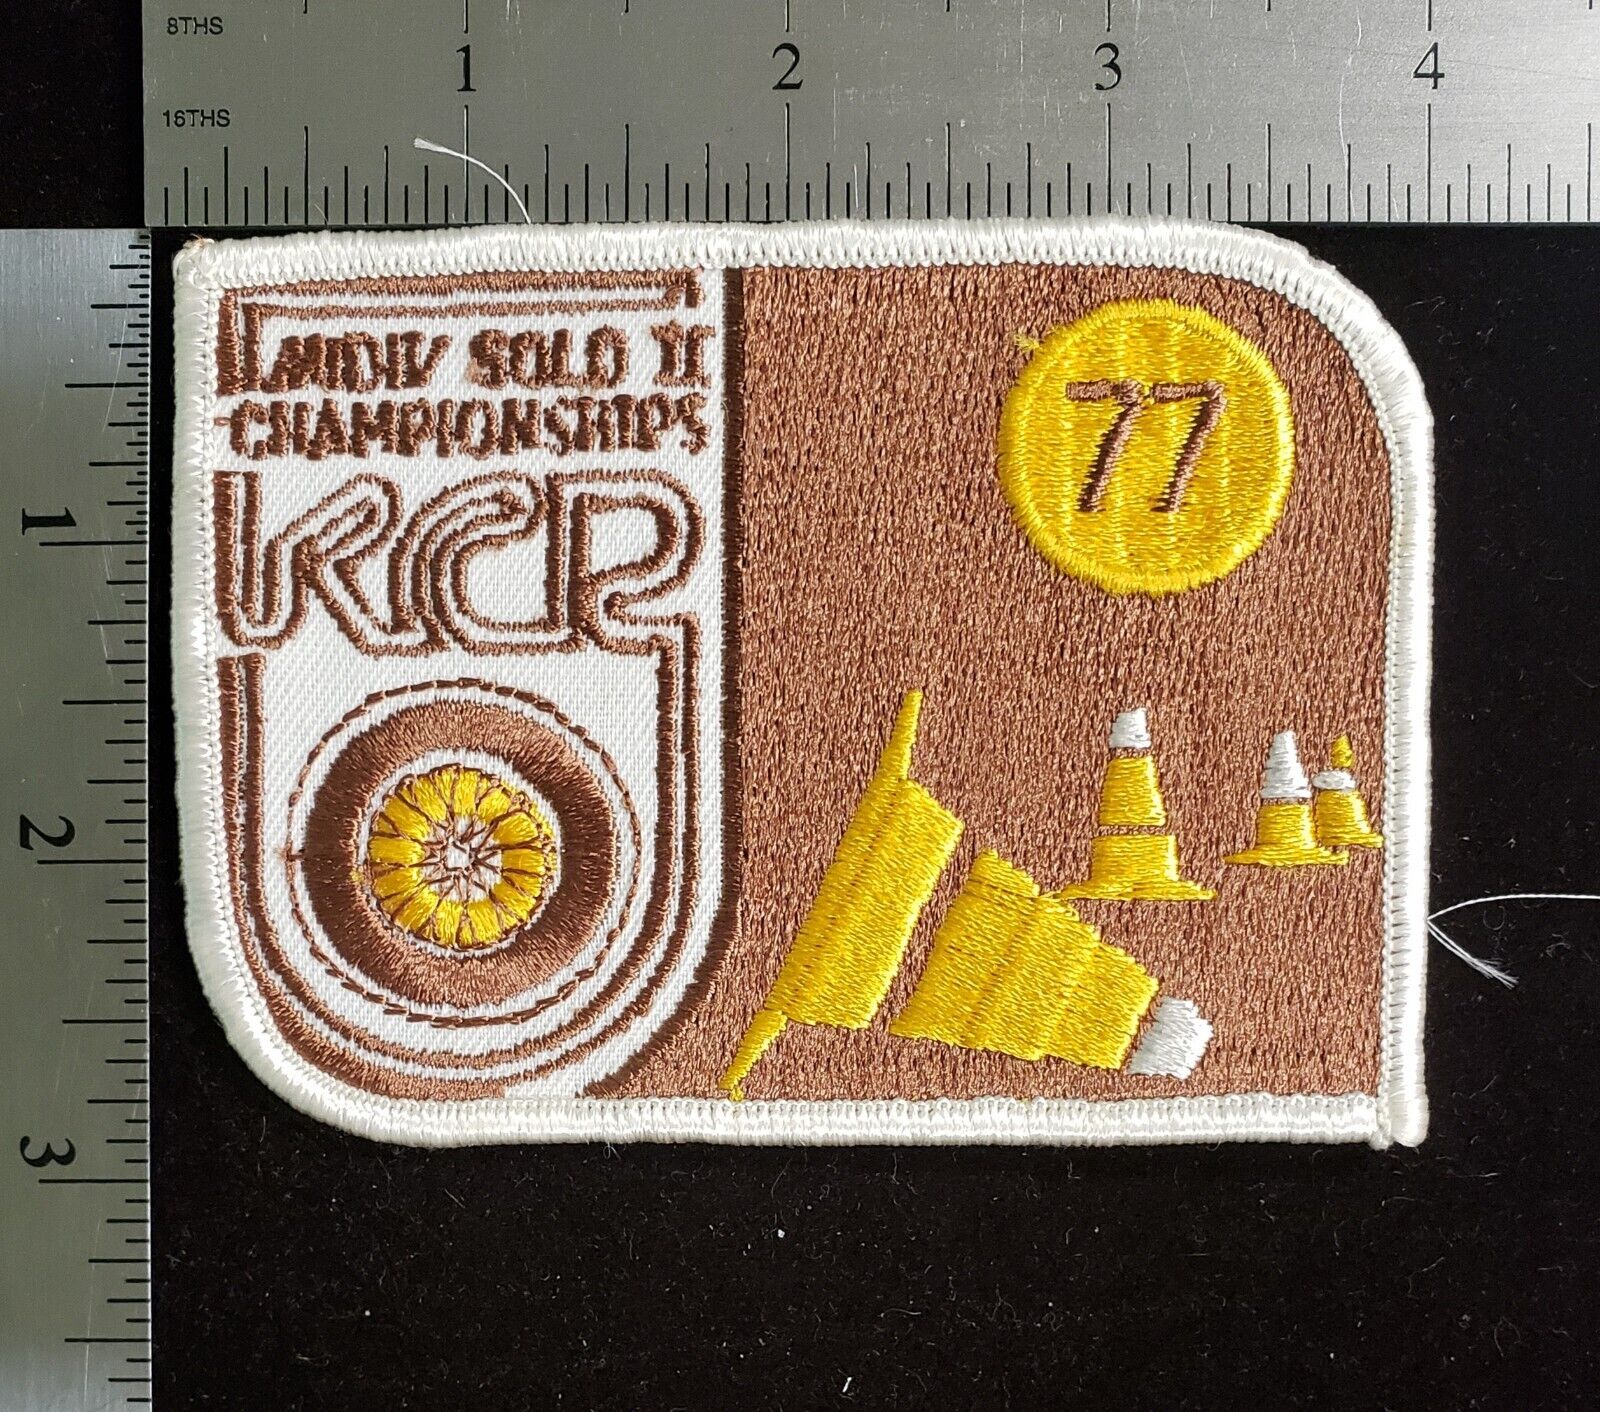 SCCA KCR Midiv Solo II Championship 1977 - Embroidered Racing Patch